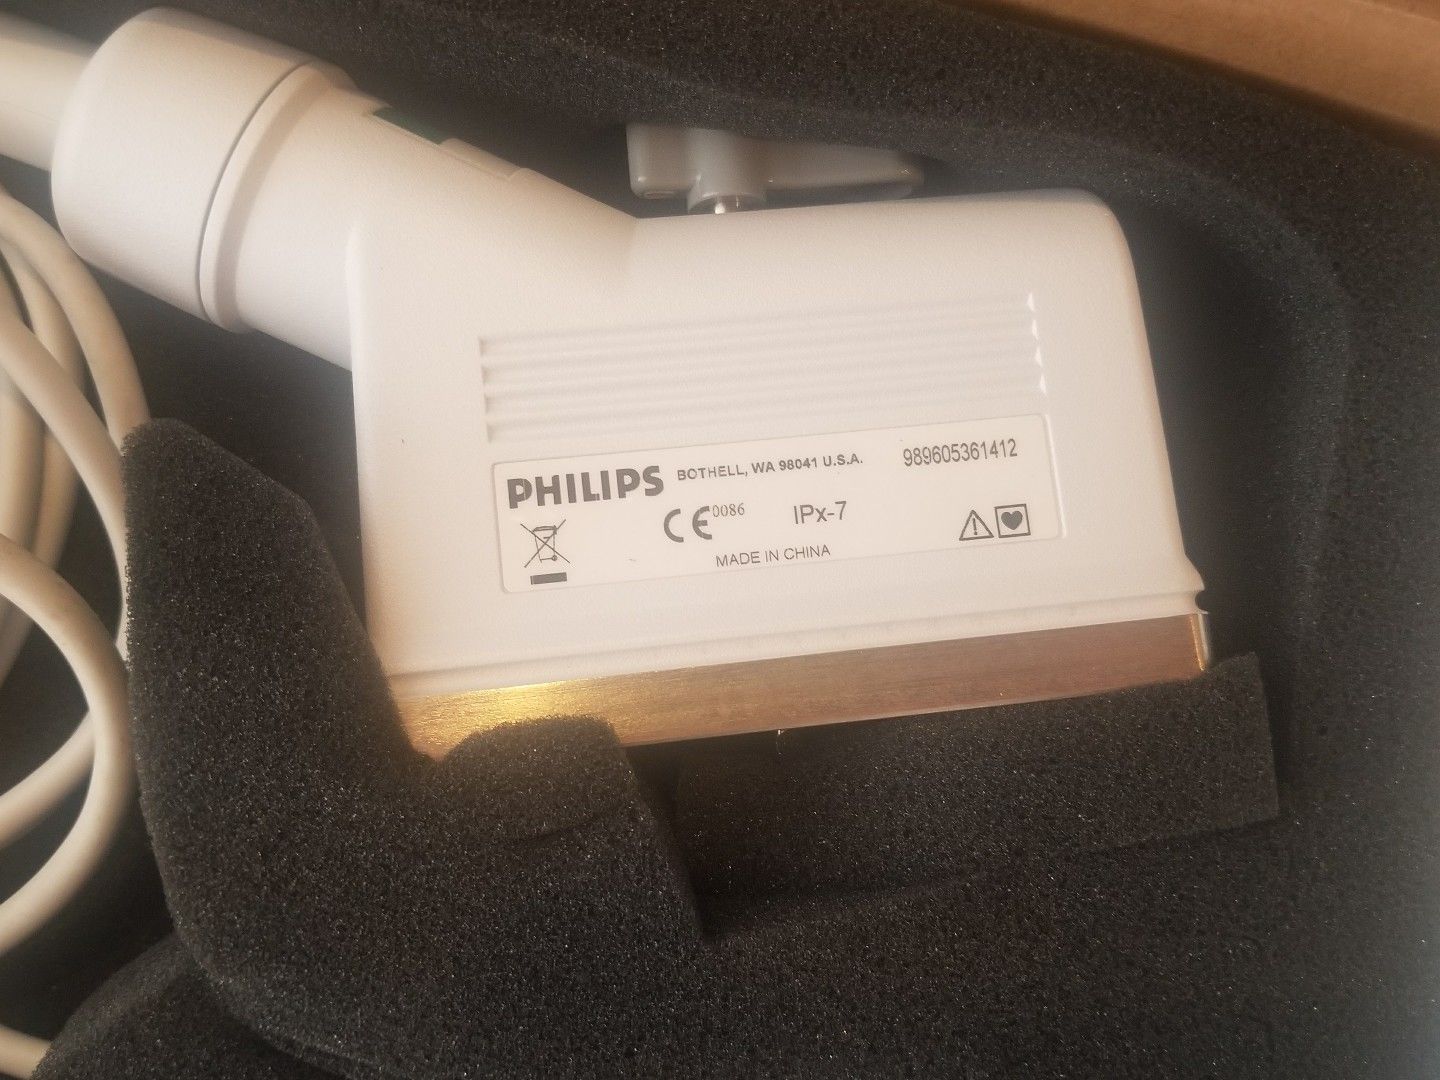 Philips Agilent S4  21330A Phased Array Probe Transducer Sonos 4500/5500/EnVisor DIAGNOSTIC ULTRASOUND MACHINES FOR SALE